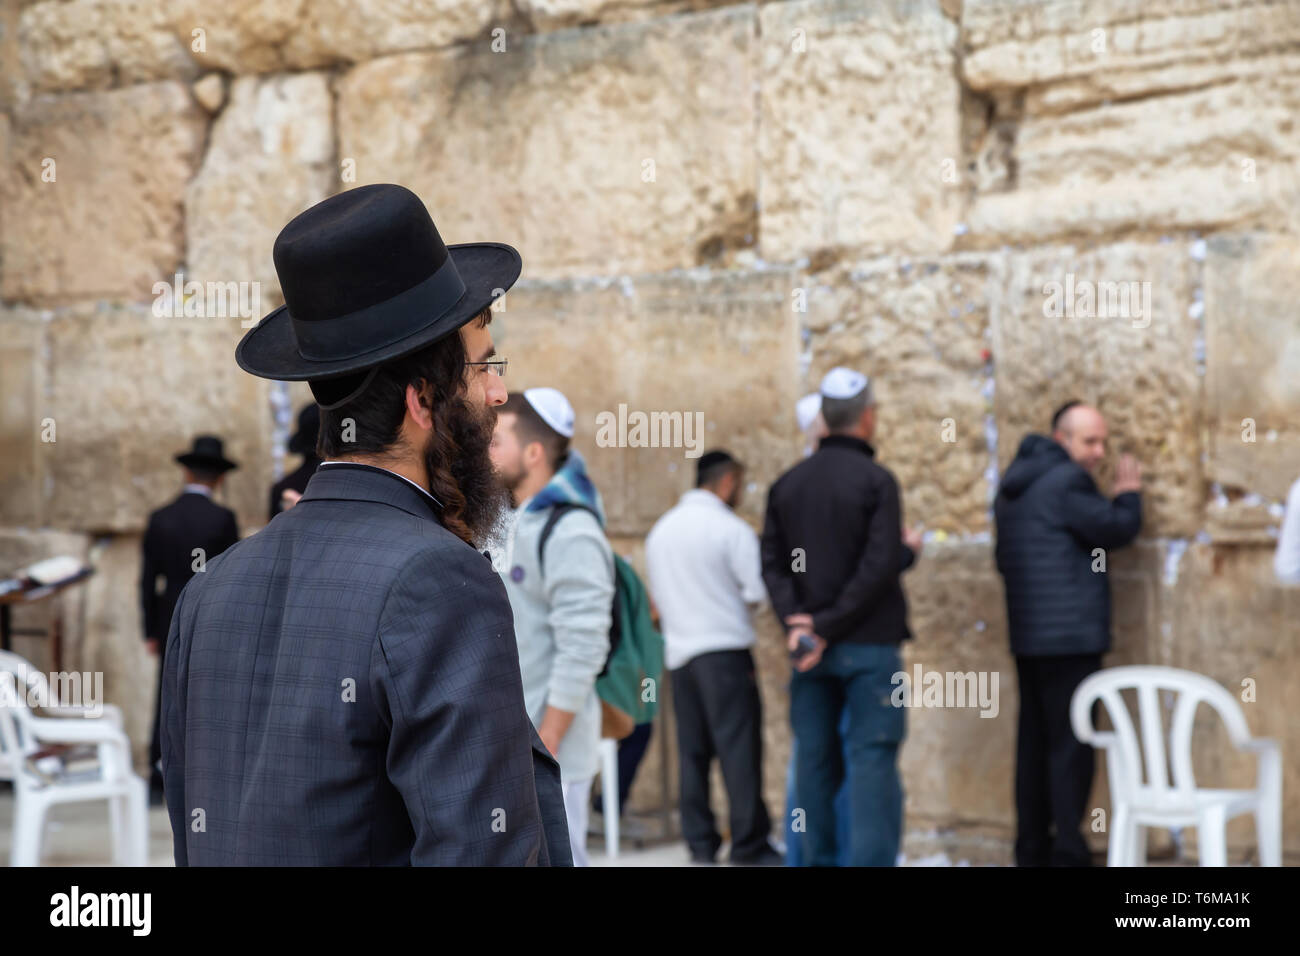 Jerusalem, Israel - April 2, 2019: Religious Man, Hasidic Jew, dressed in black is praying by the Western Wall in the Old City. Stock Photo